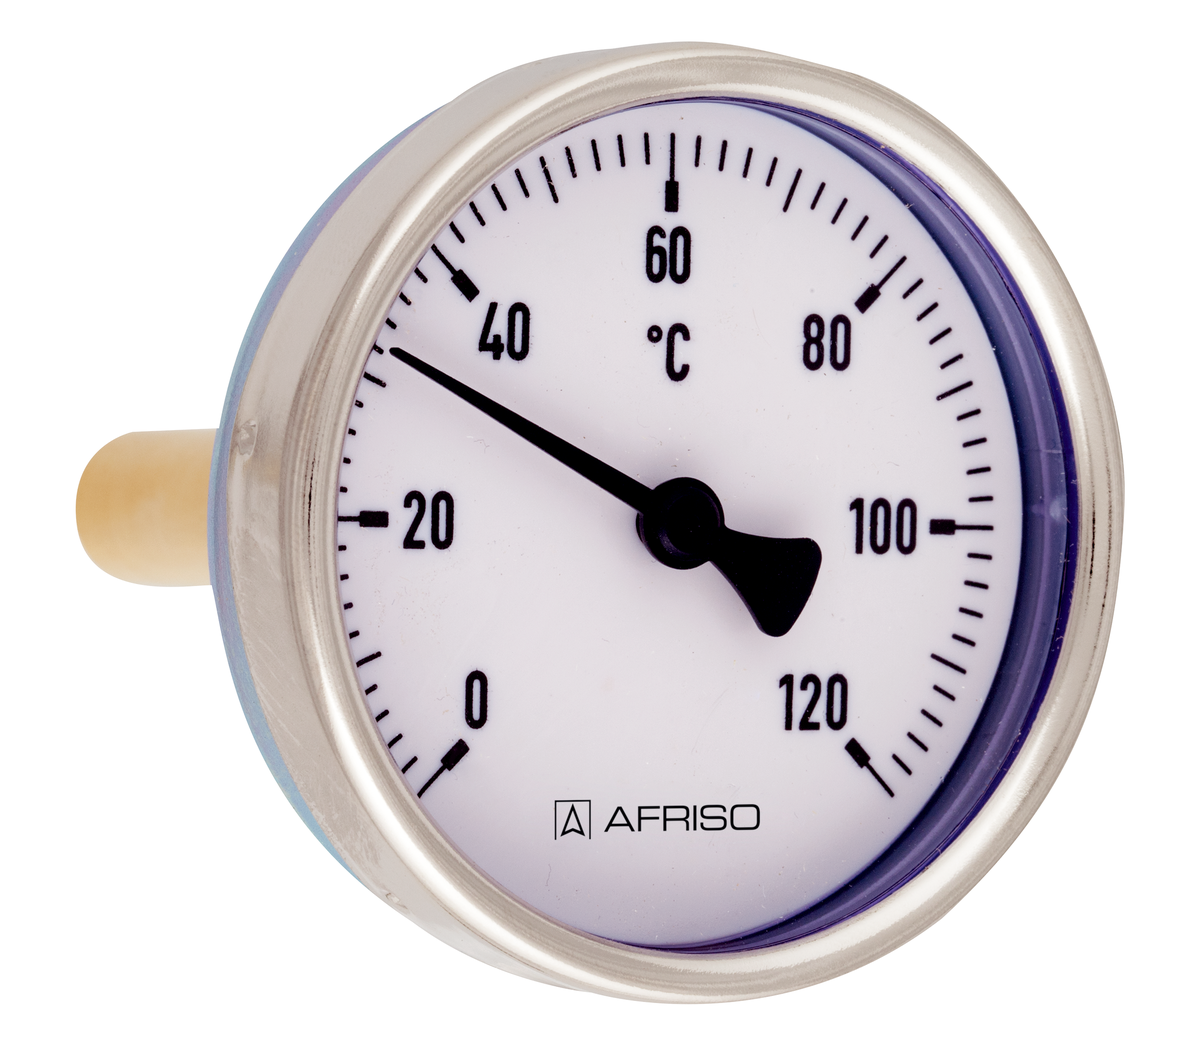 AFRISO Bimetall-Thermometer BiTh 50 ST 0/60C 40mm G1/2B axial Kl.2 SAL 88310 88320 88330 88340 88360 88370 88380 88390 88420 88430 88440 88450 88470 88480 88490 88500 88520 88530 88540 88550 88570 88580 88590 88600 88630 88640 88650 88660 88680 88690 88700 88710 88730 88740 88750 88760 88770 88790 88800 88810 88820 88850 88860 88870 88880 88900 88910 88920 88930 88950 88960 88970 88980 88990 89010 89020 89030 89040